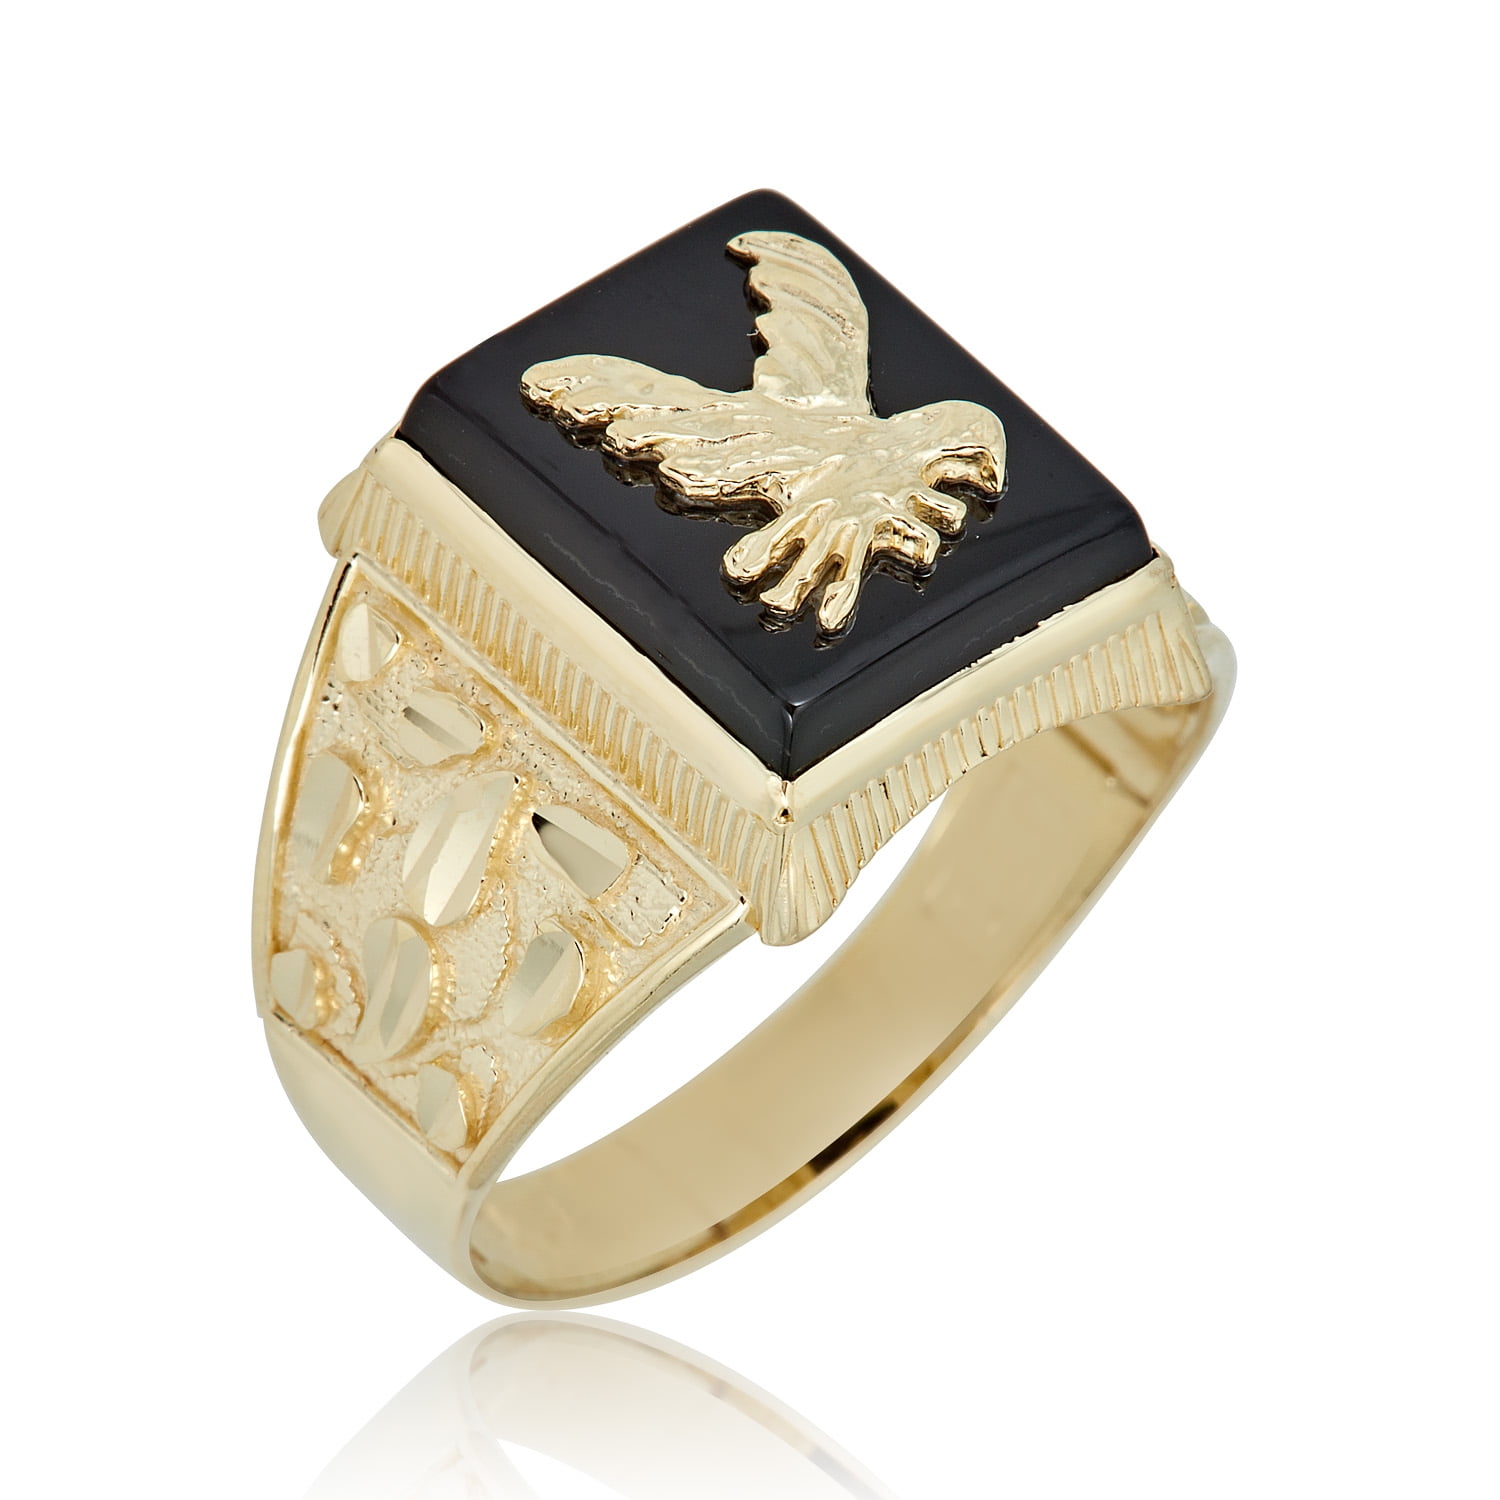 Men's Gold Rings - The Blue Stone Eagle Gold Ring